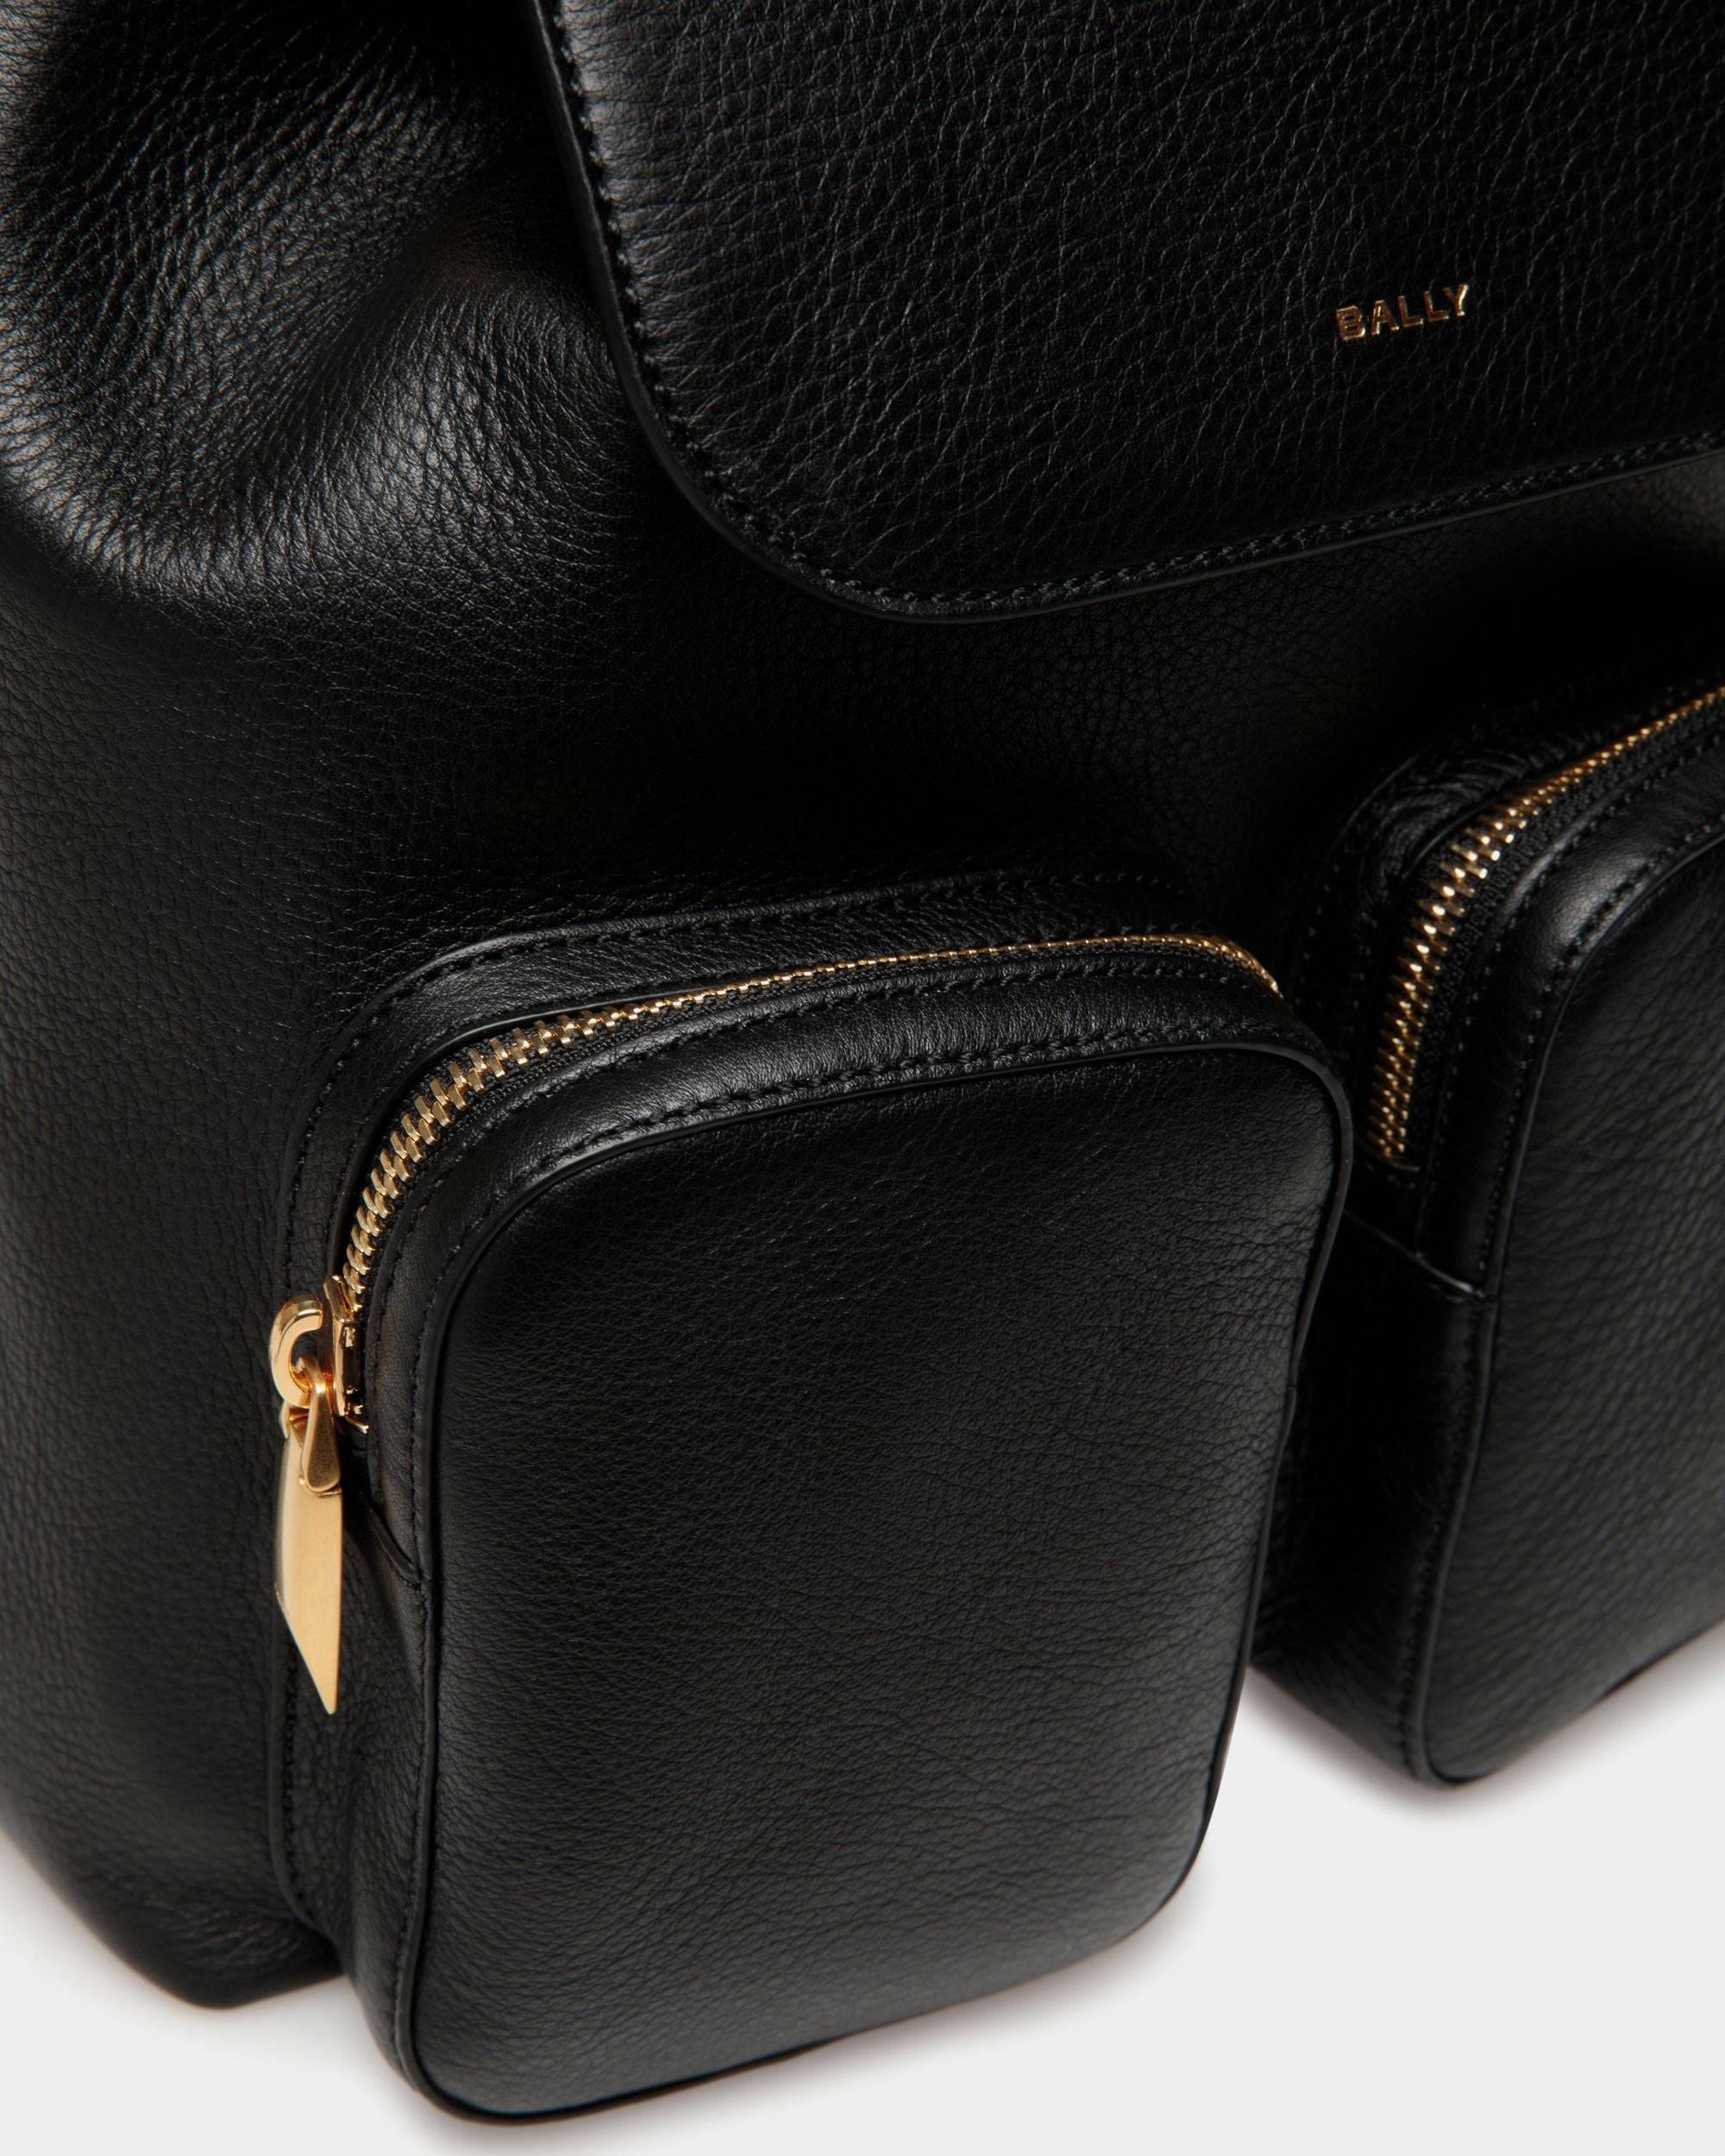 Code Backpack in Black Leather - Women's - Bally - 05